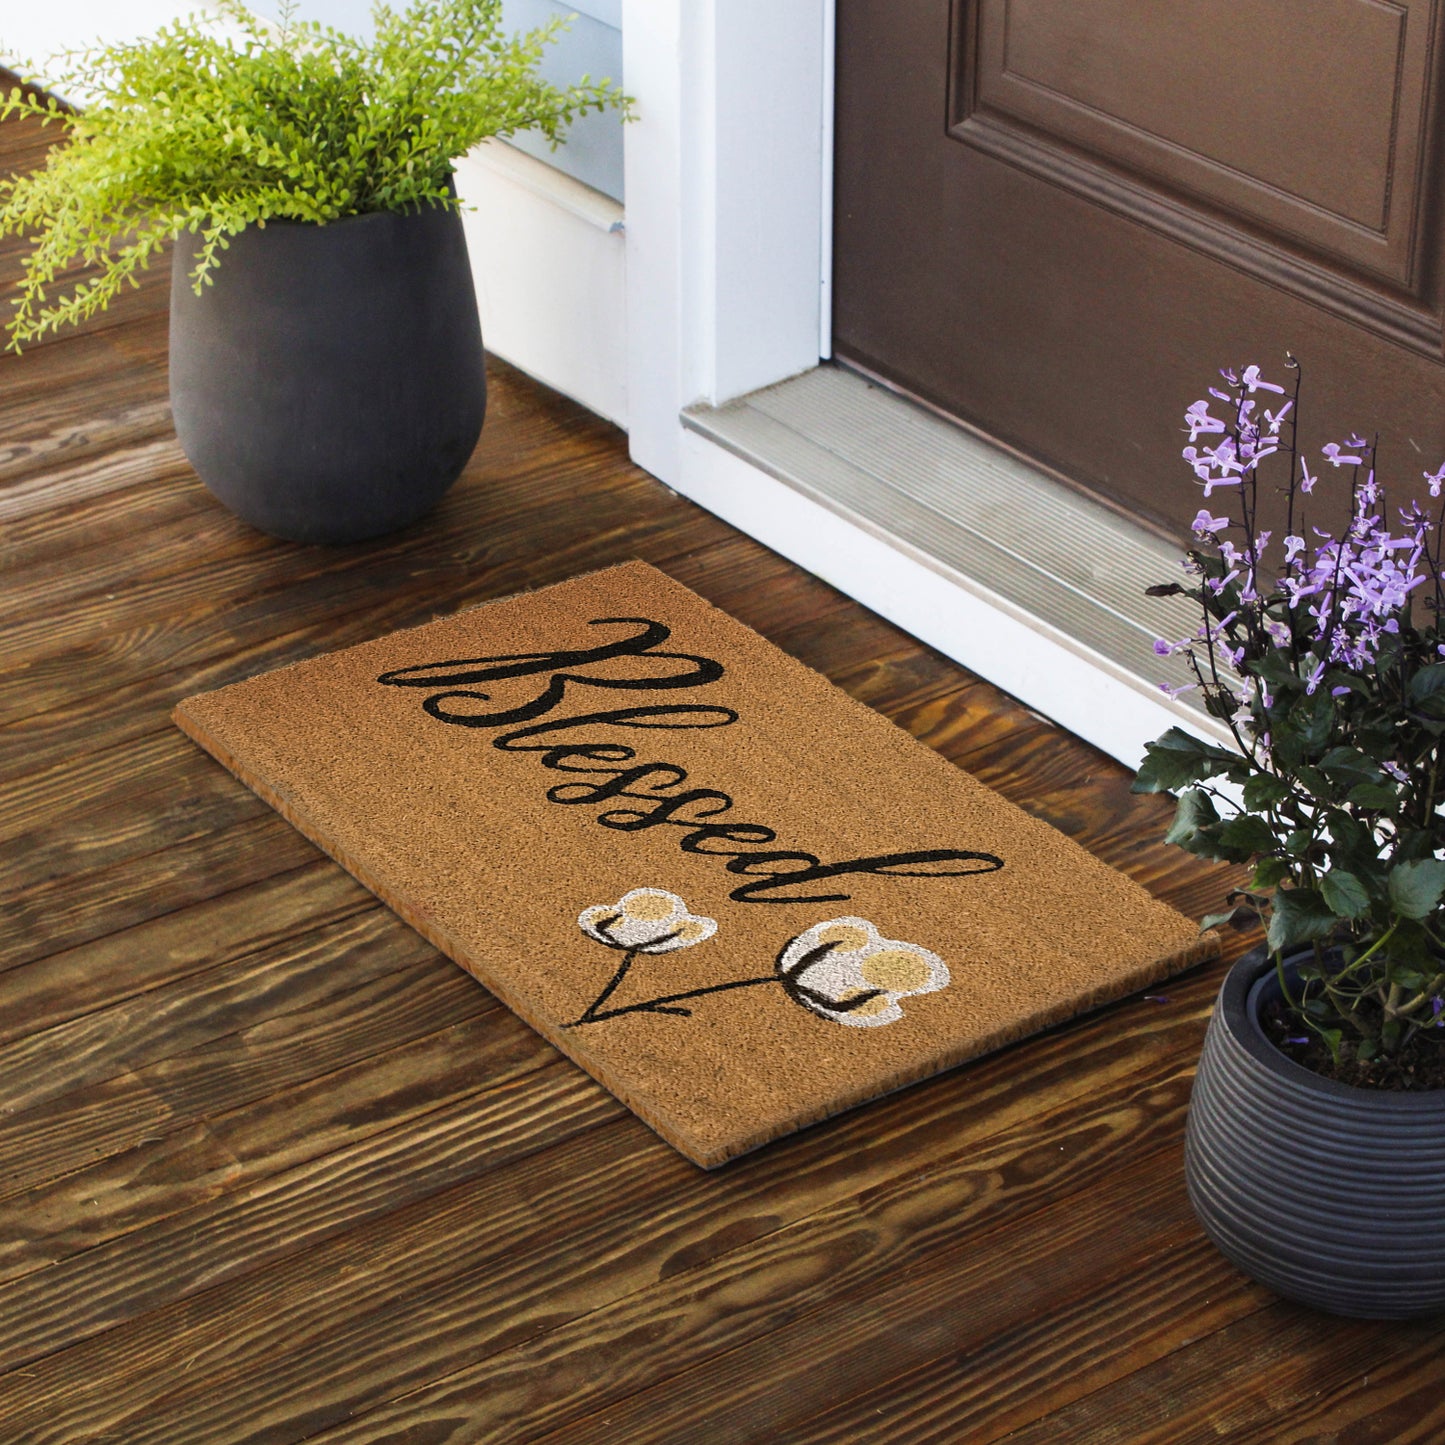 Avera Products "Blessed" Cotton Bloom Coir Mat